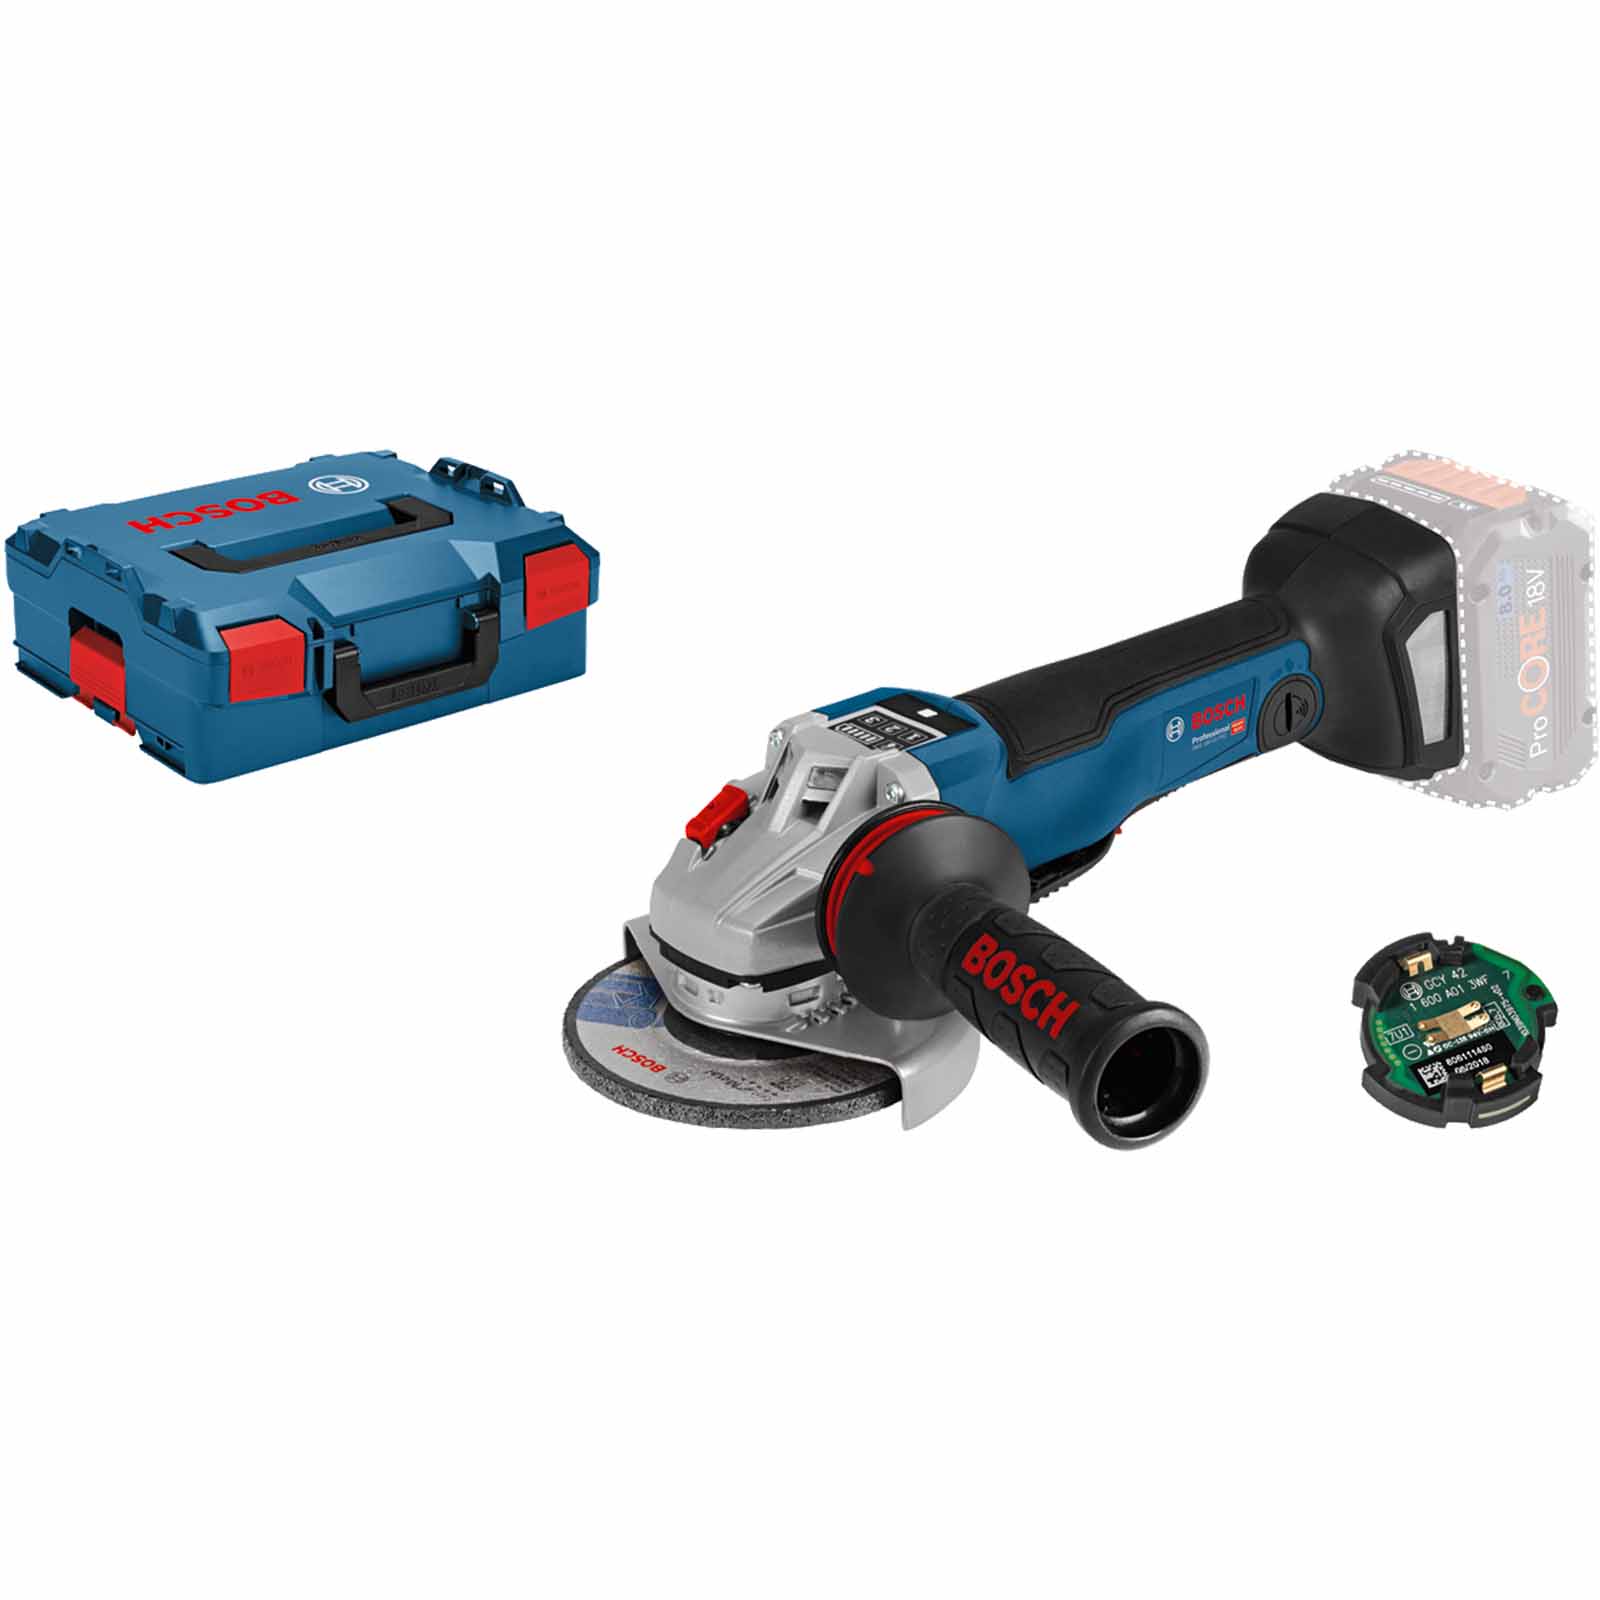 Bosch GWS 18 V-10 PSC Cordless Angle Grinder 125mm No Batteries No Charger Case